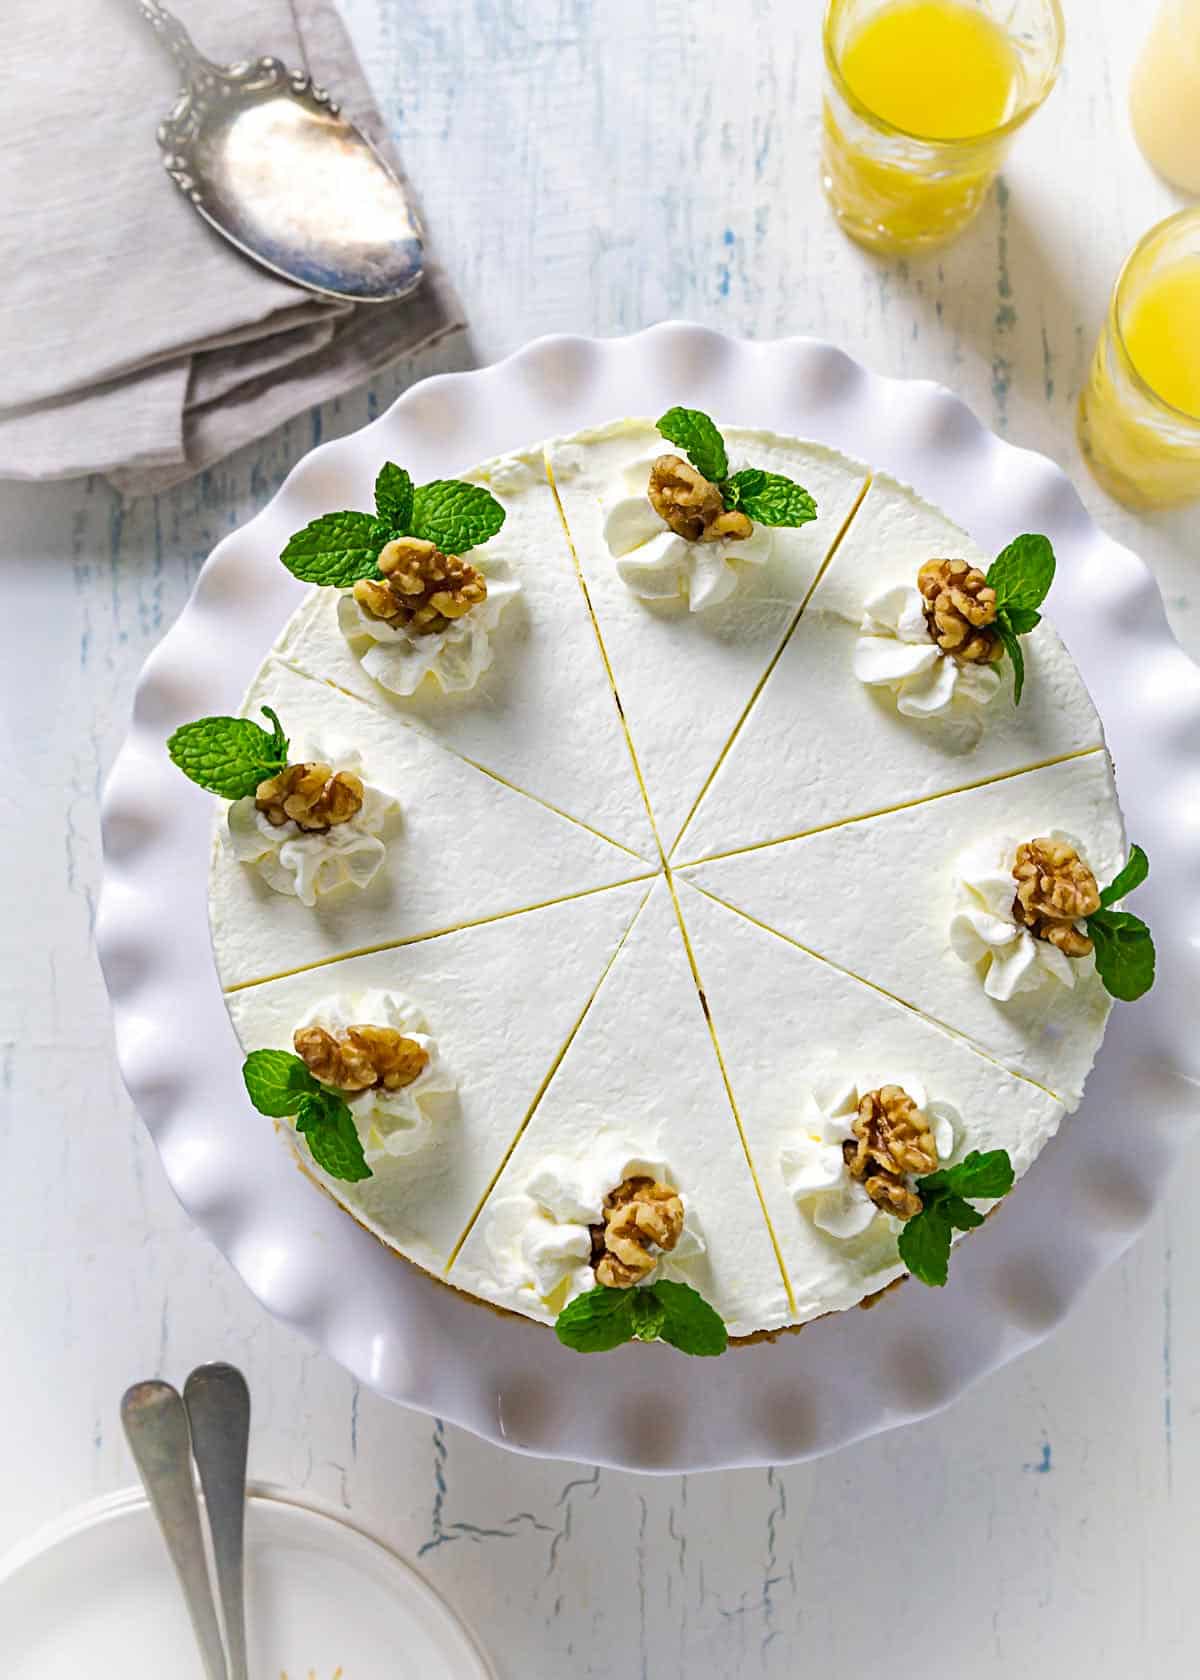 An overhead view of decorated sand cake with cool whip, walnuts, and mint leaves as garnish.